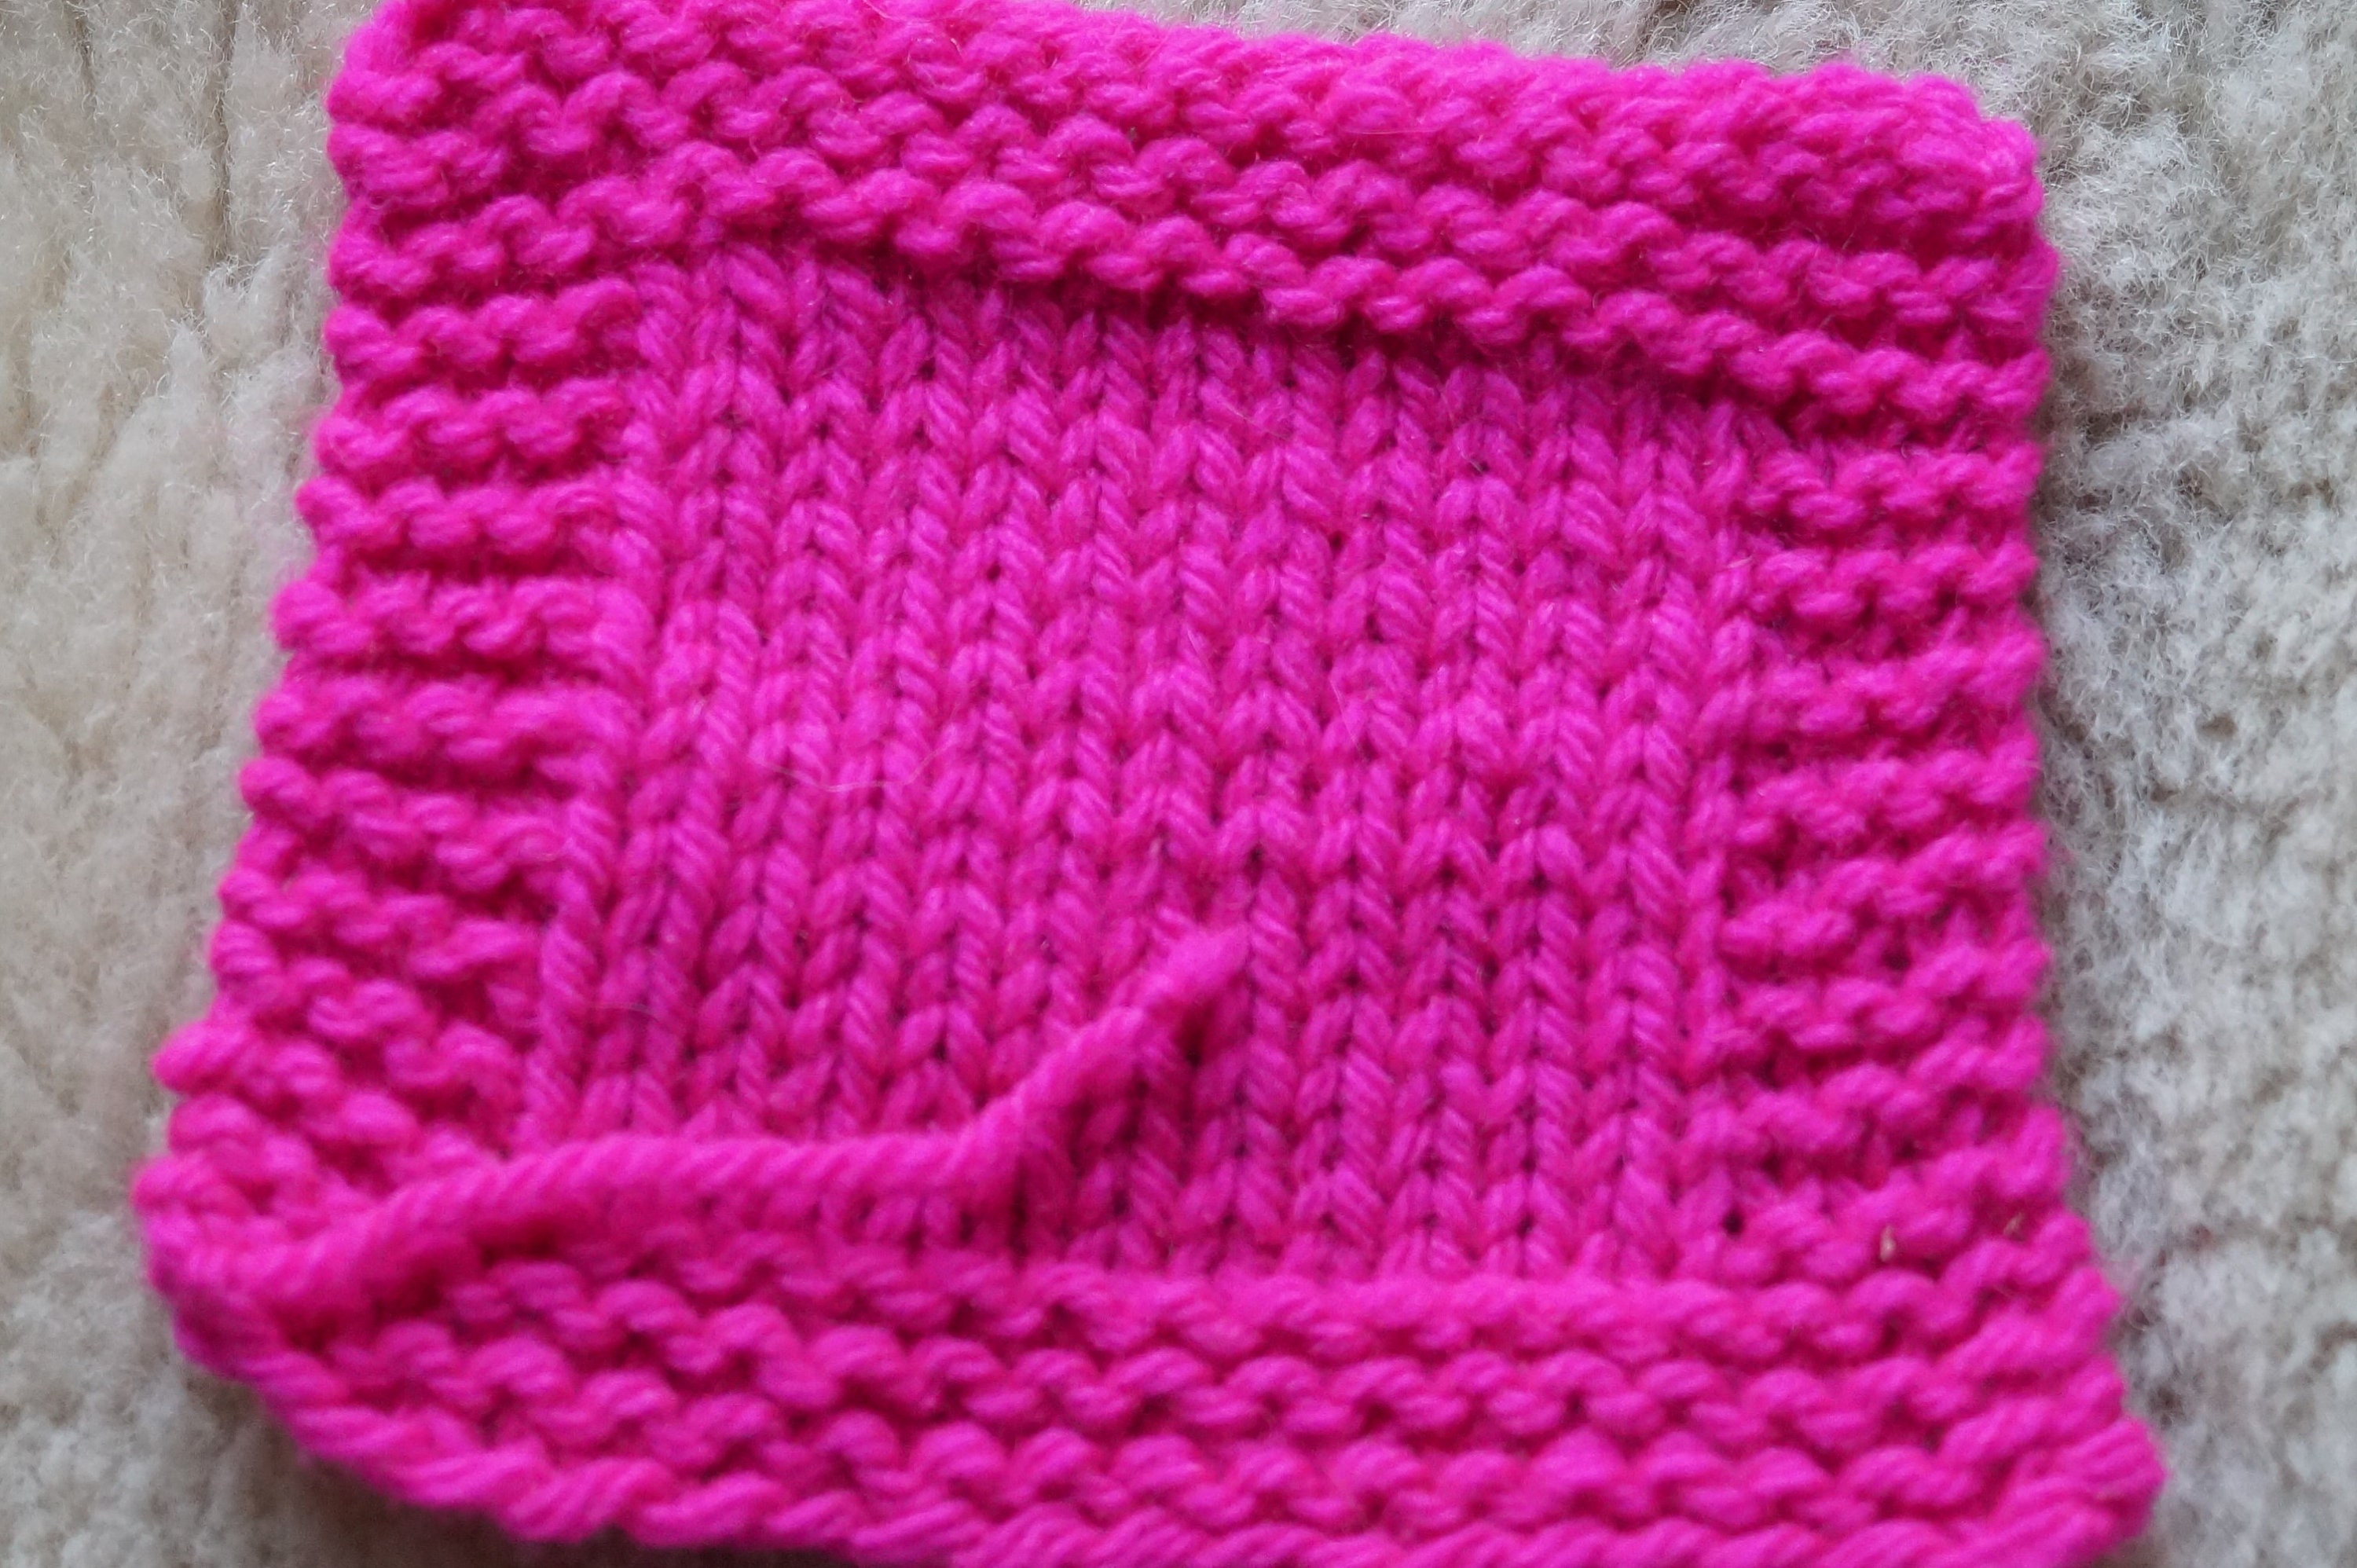 Neon Pink worsted wool hand dyed 3 ply soft wool yarn from our